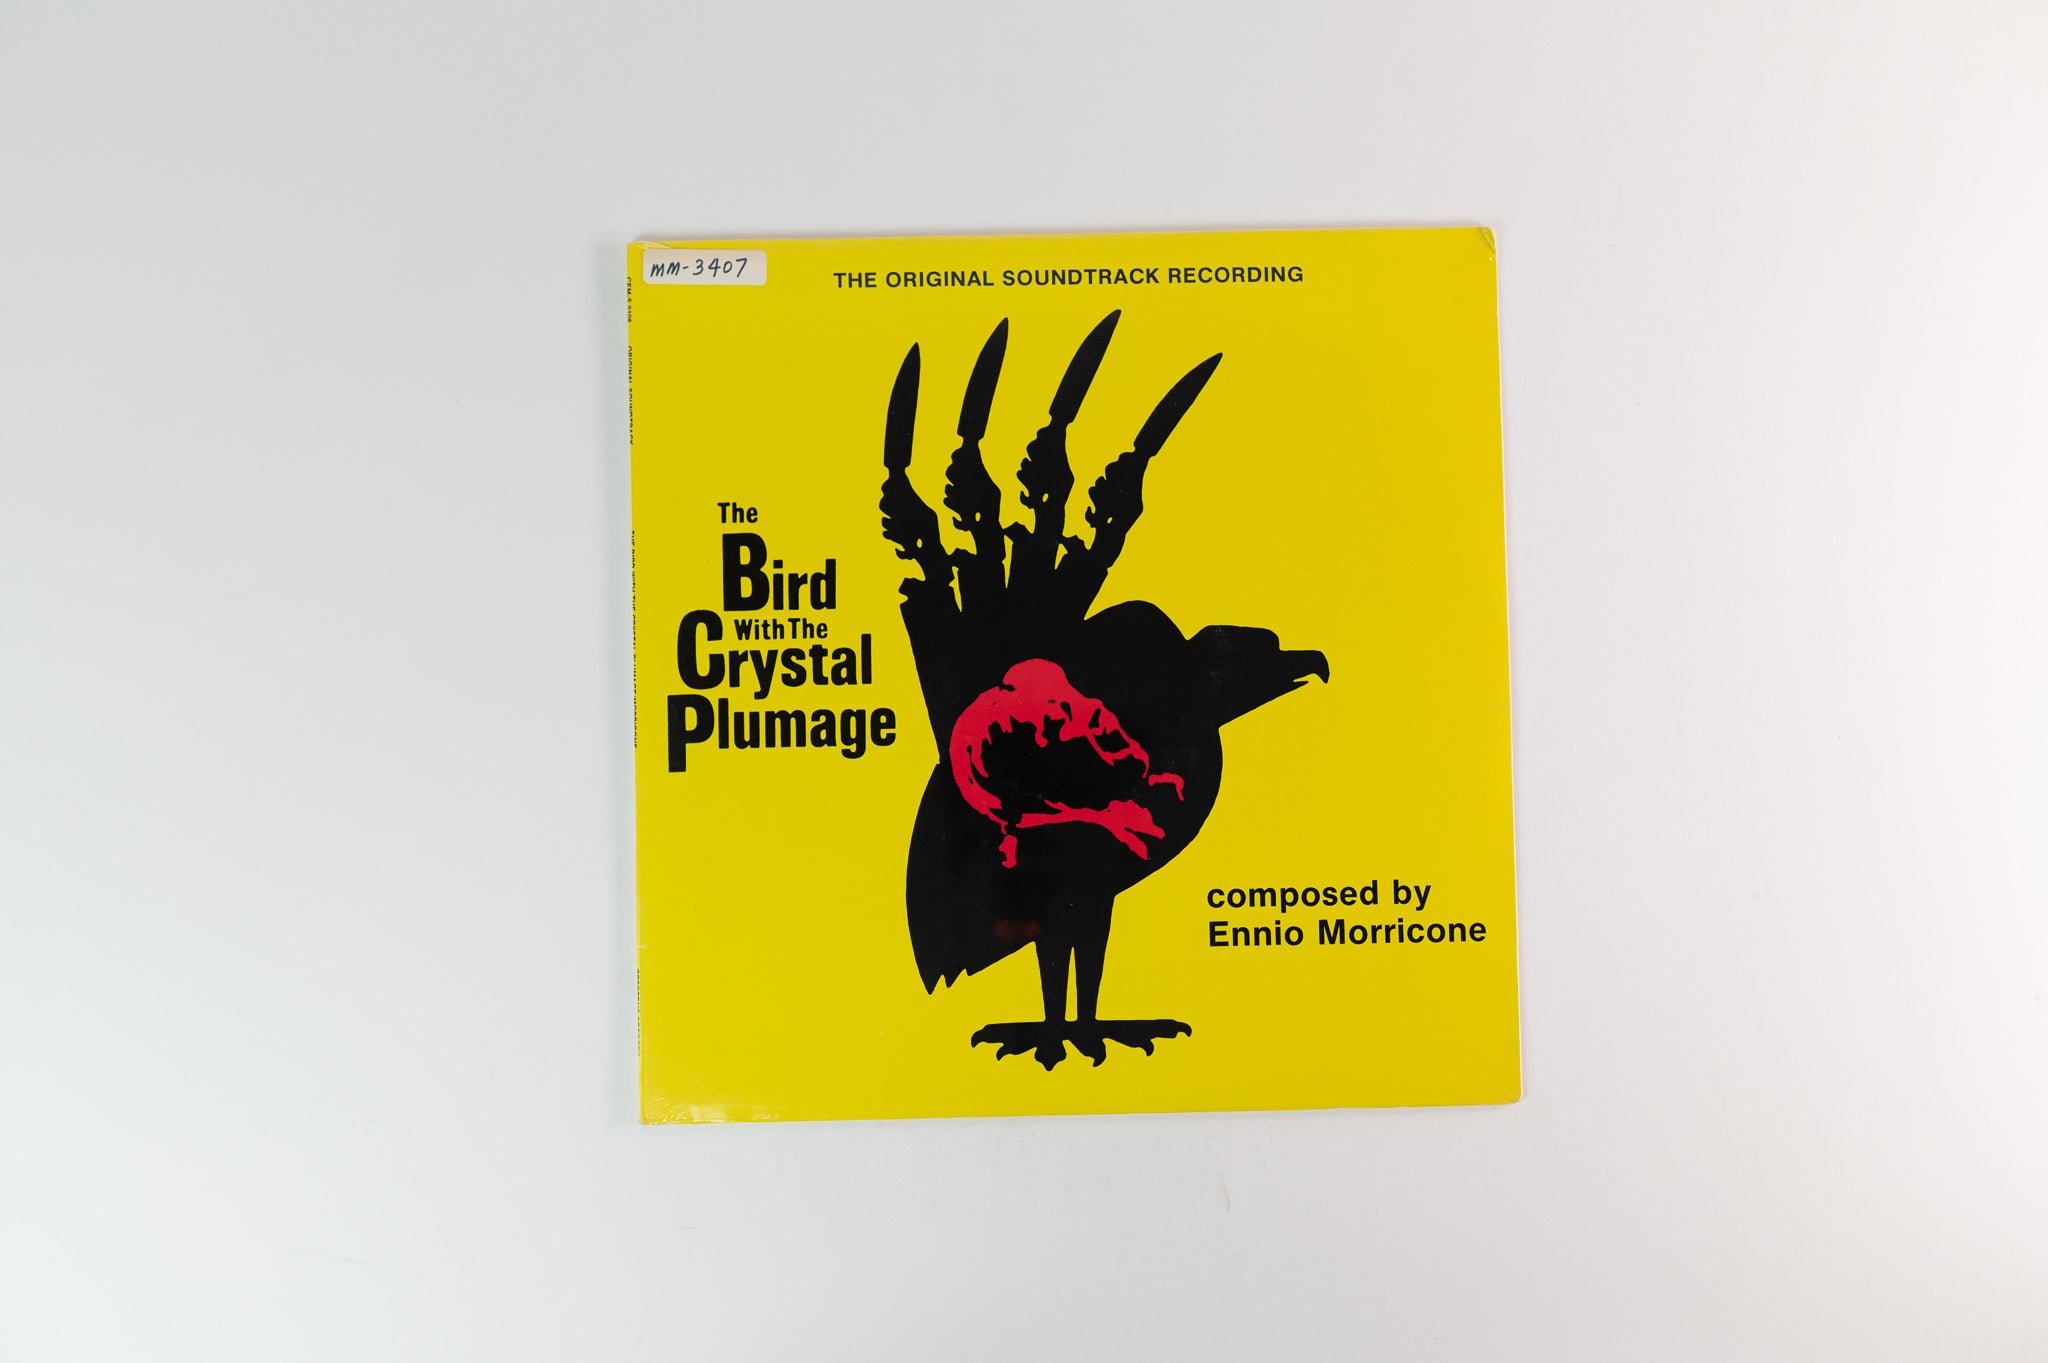 Ennio Morricone - The Bird With The Crystal Plumage (The Original Soundtrack) Sealed